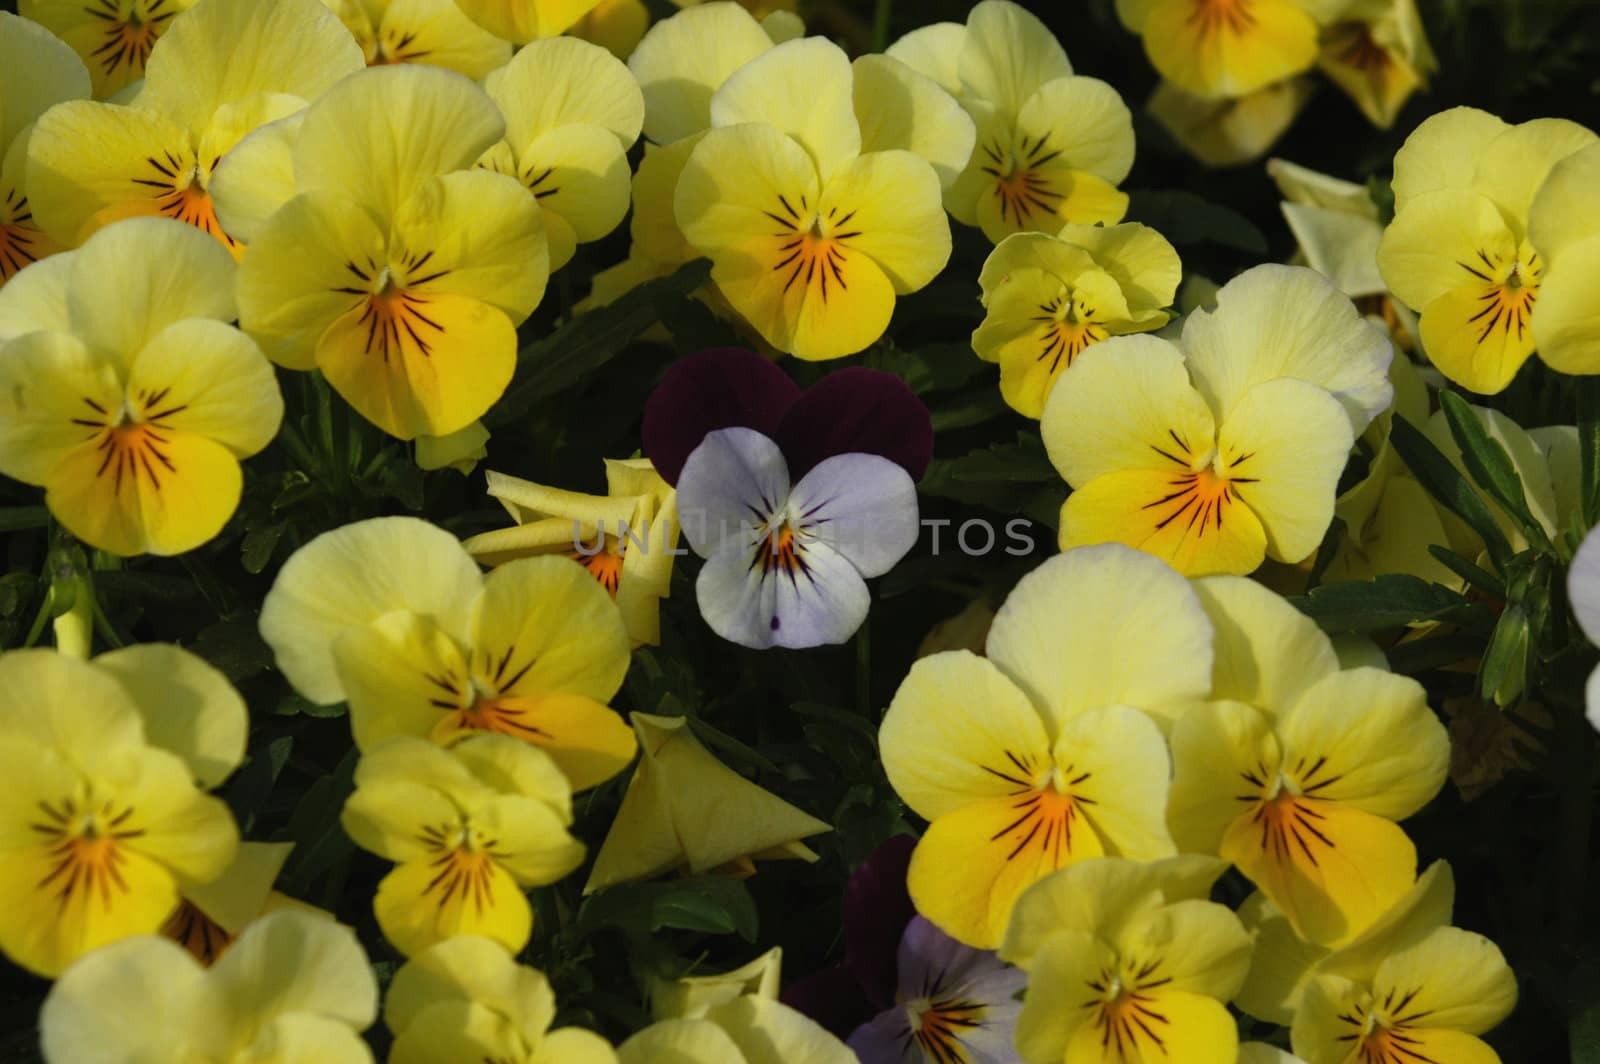 Pansy field by northwoodsphoto